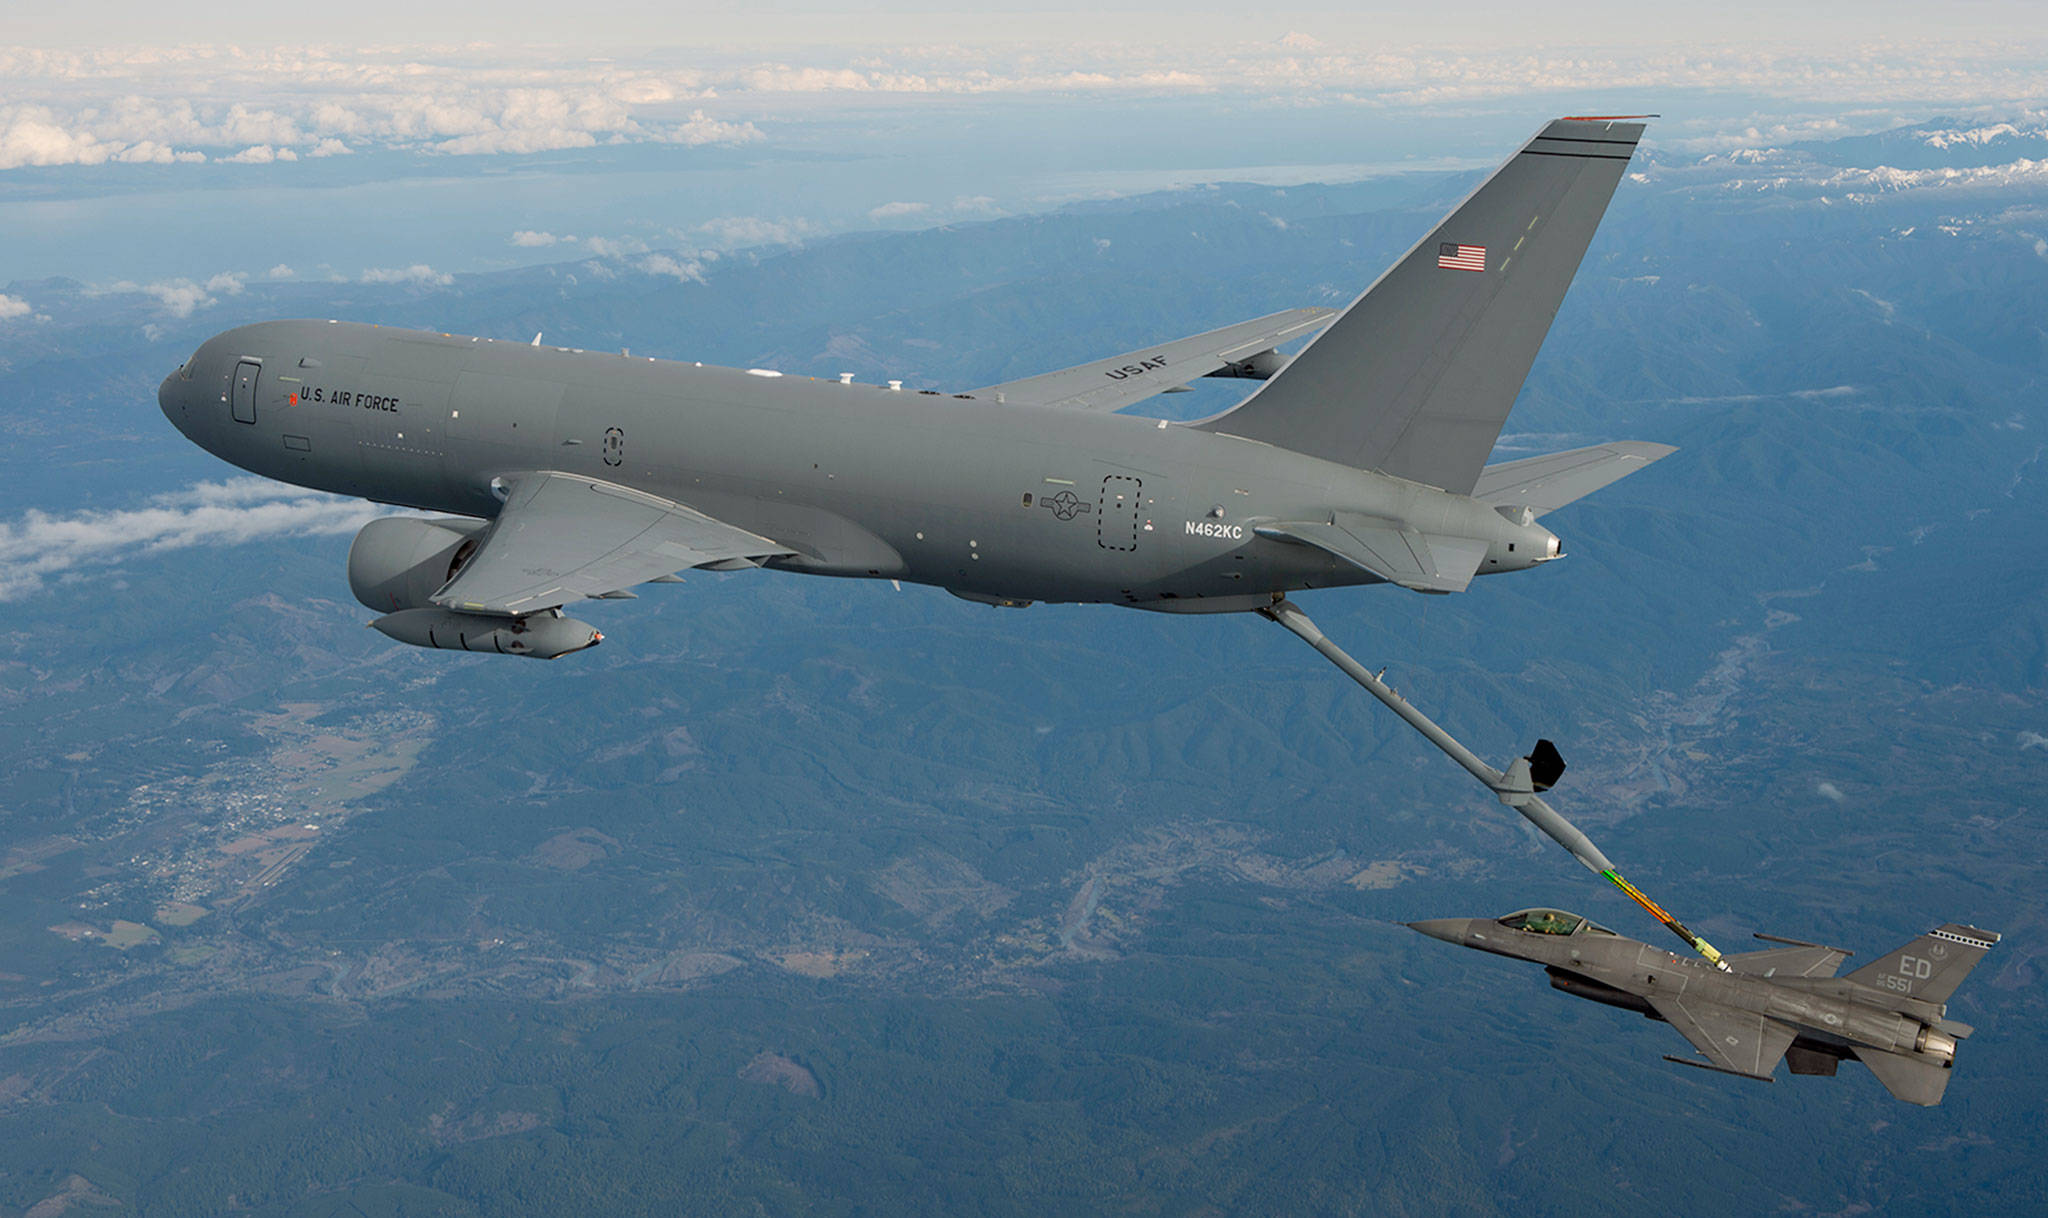 A Boeing KC-46 Pegasus tanker refuels an F-16 fighter while airborne during a test flight. (Boeing Co.)